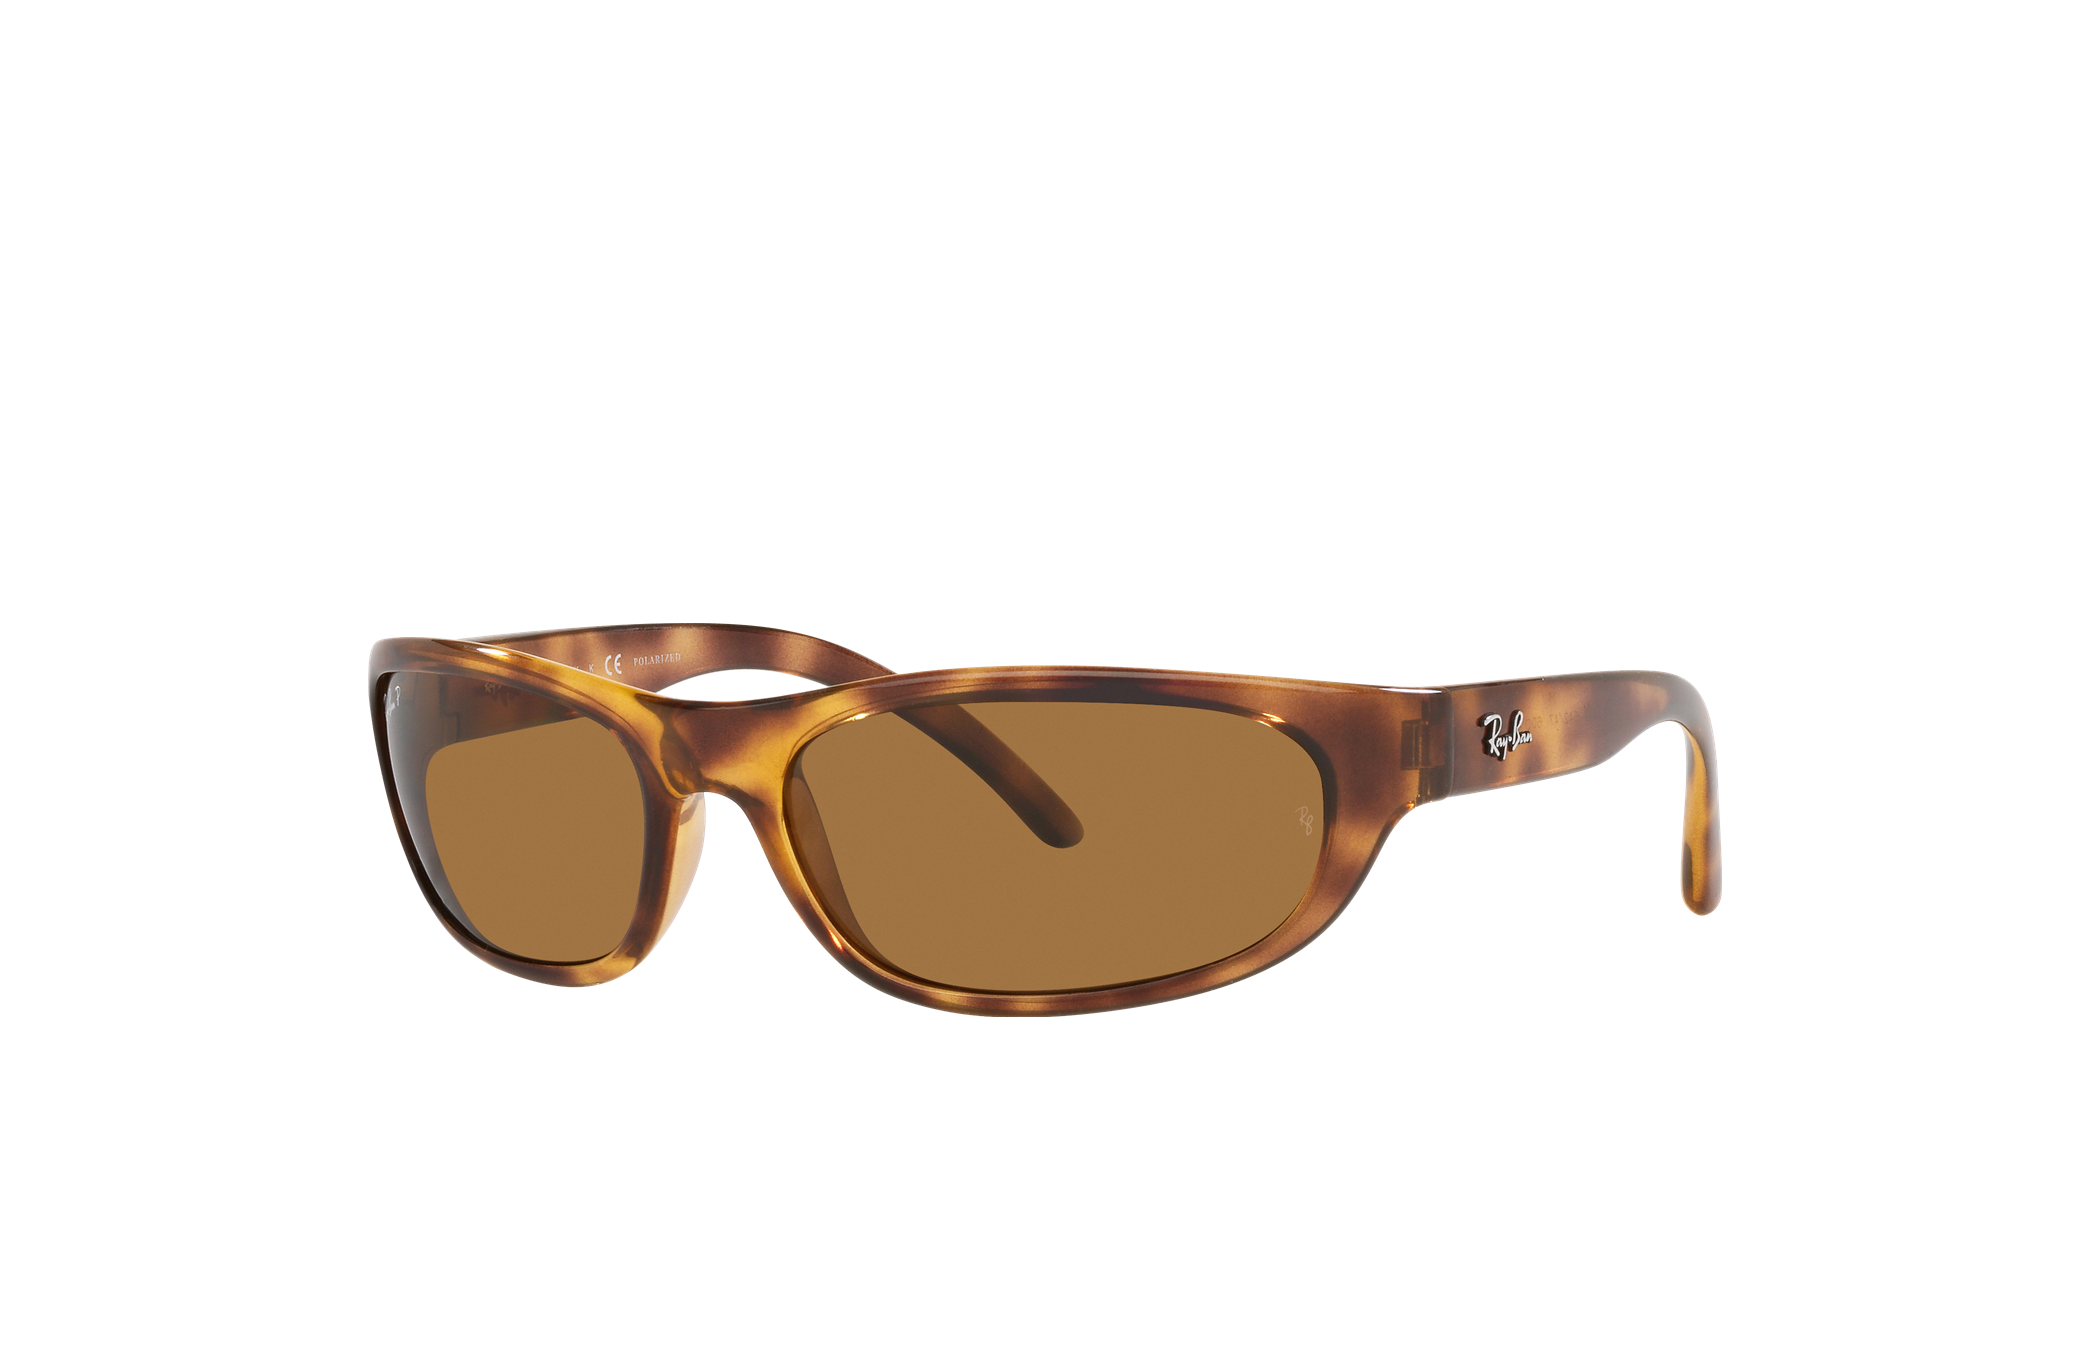 Rb4033 Sunglasses in Havana and Brown - RB4033 | Ray-Ban® US